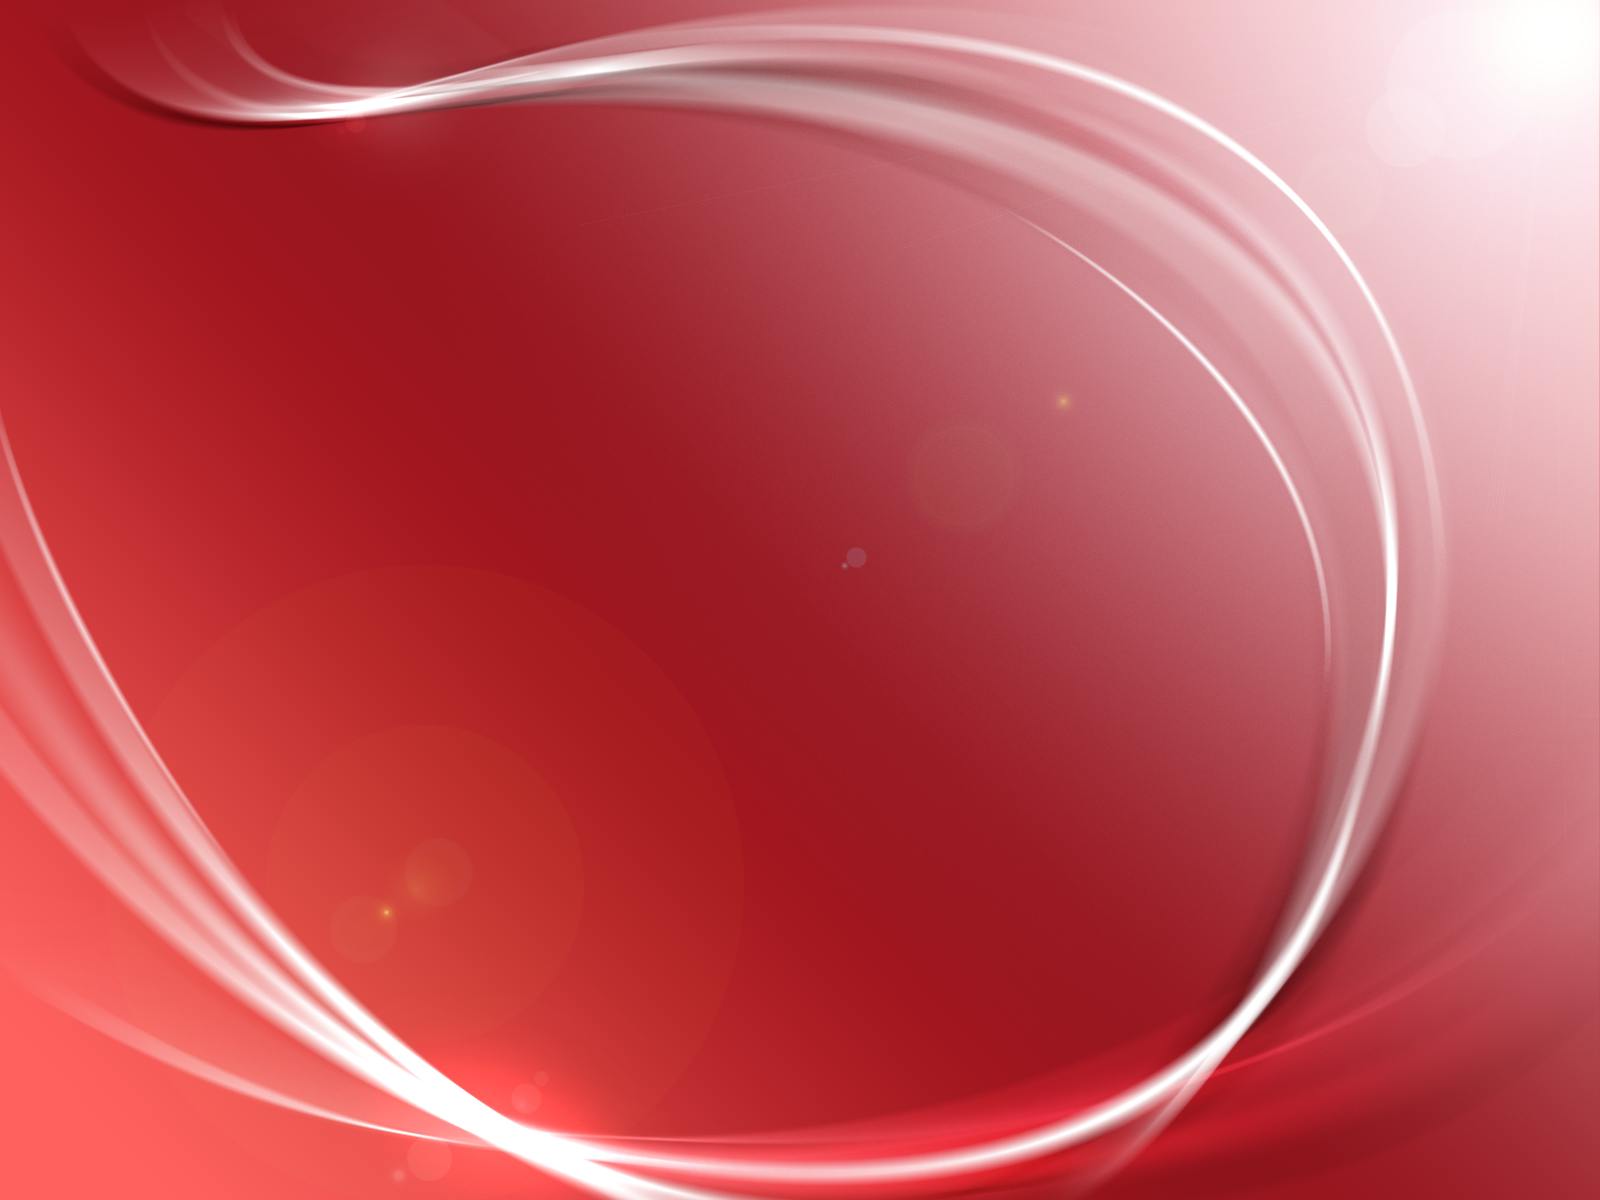 Free Abstract Red Circle Backgrounds For PowerPoint   Abstract and